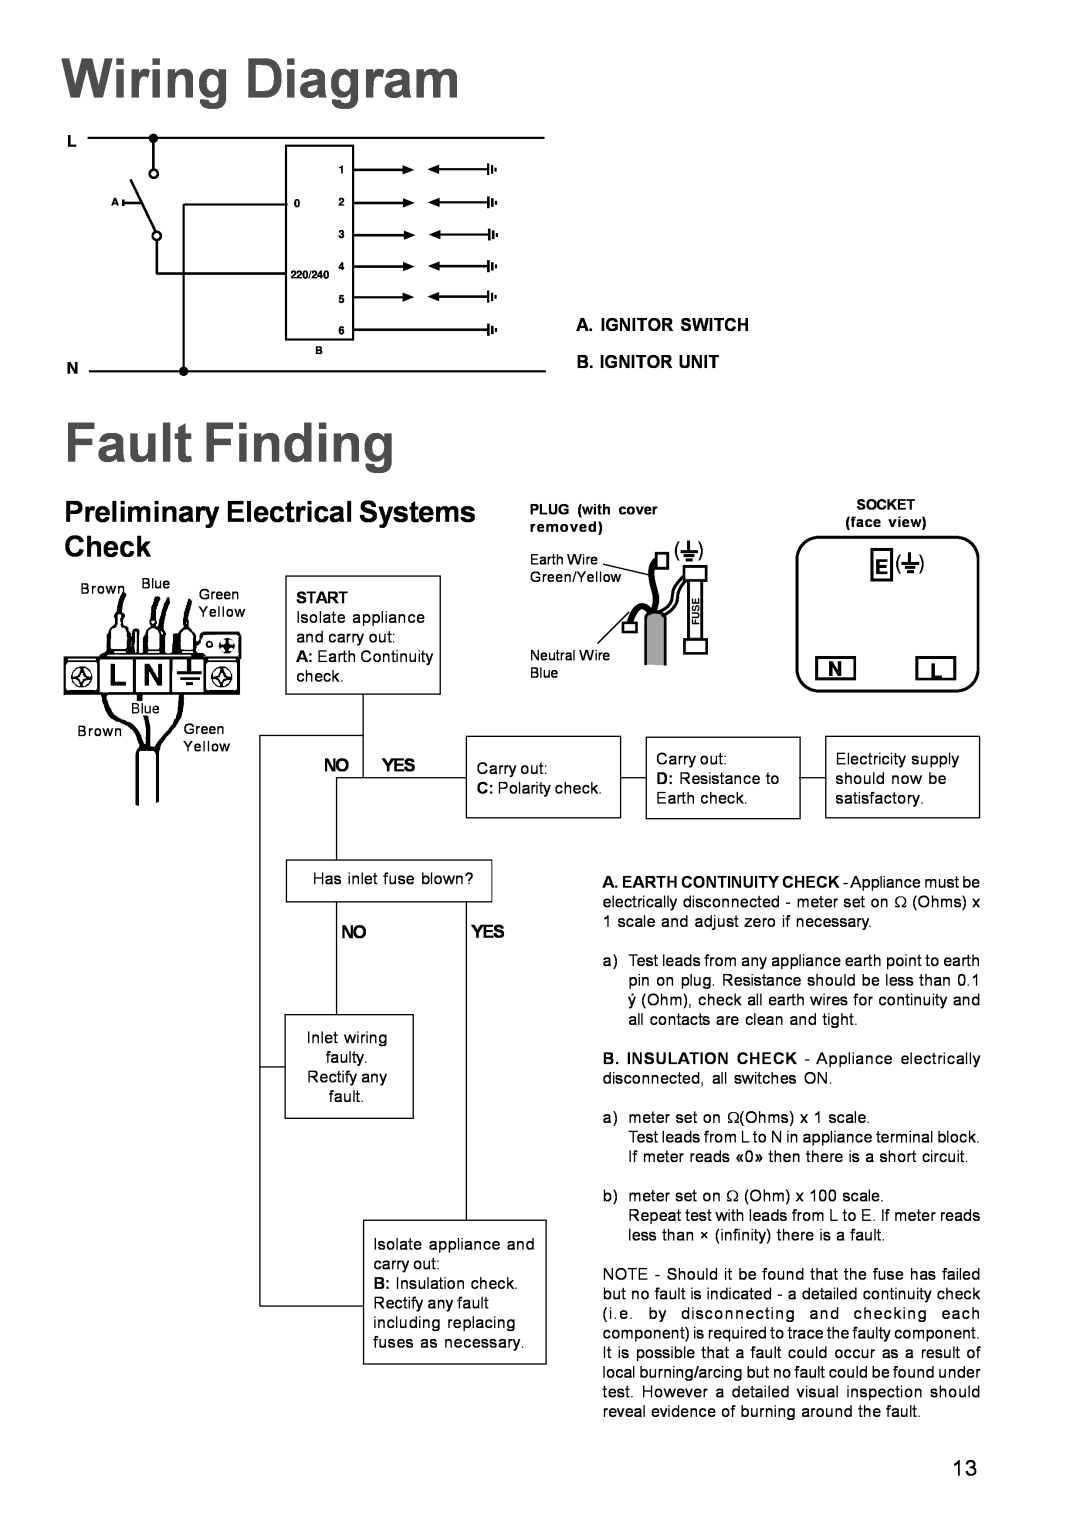 Zanussi ZGL 62 manual Wiring Diagram, Fault Finding, Preliminary Electrical Systems, Check 